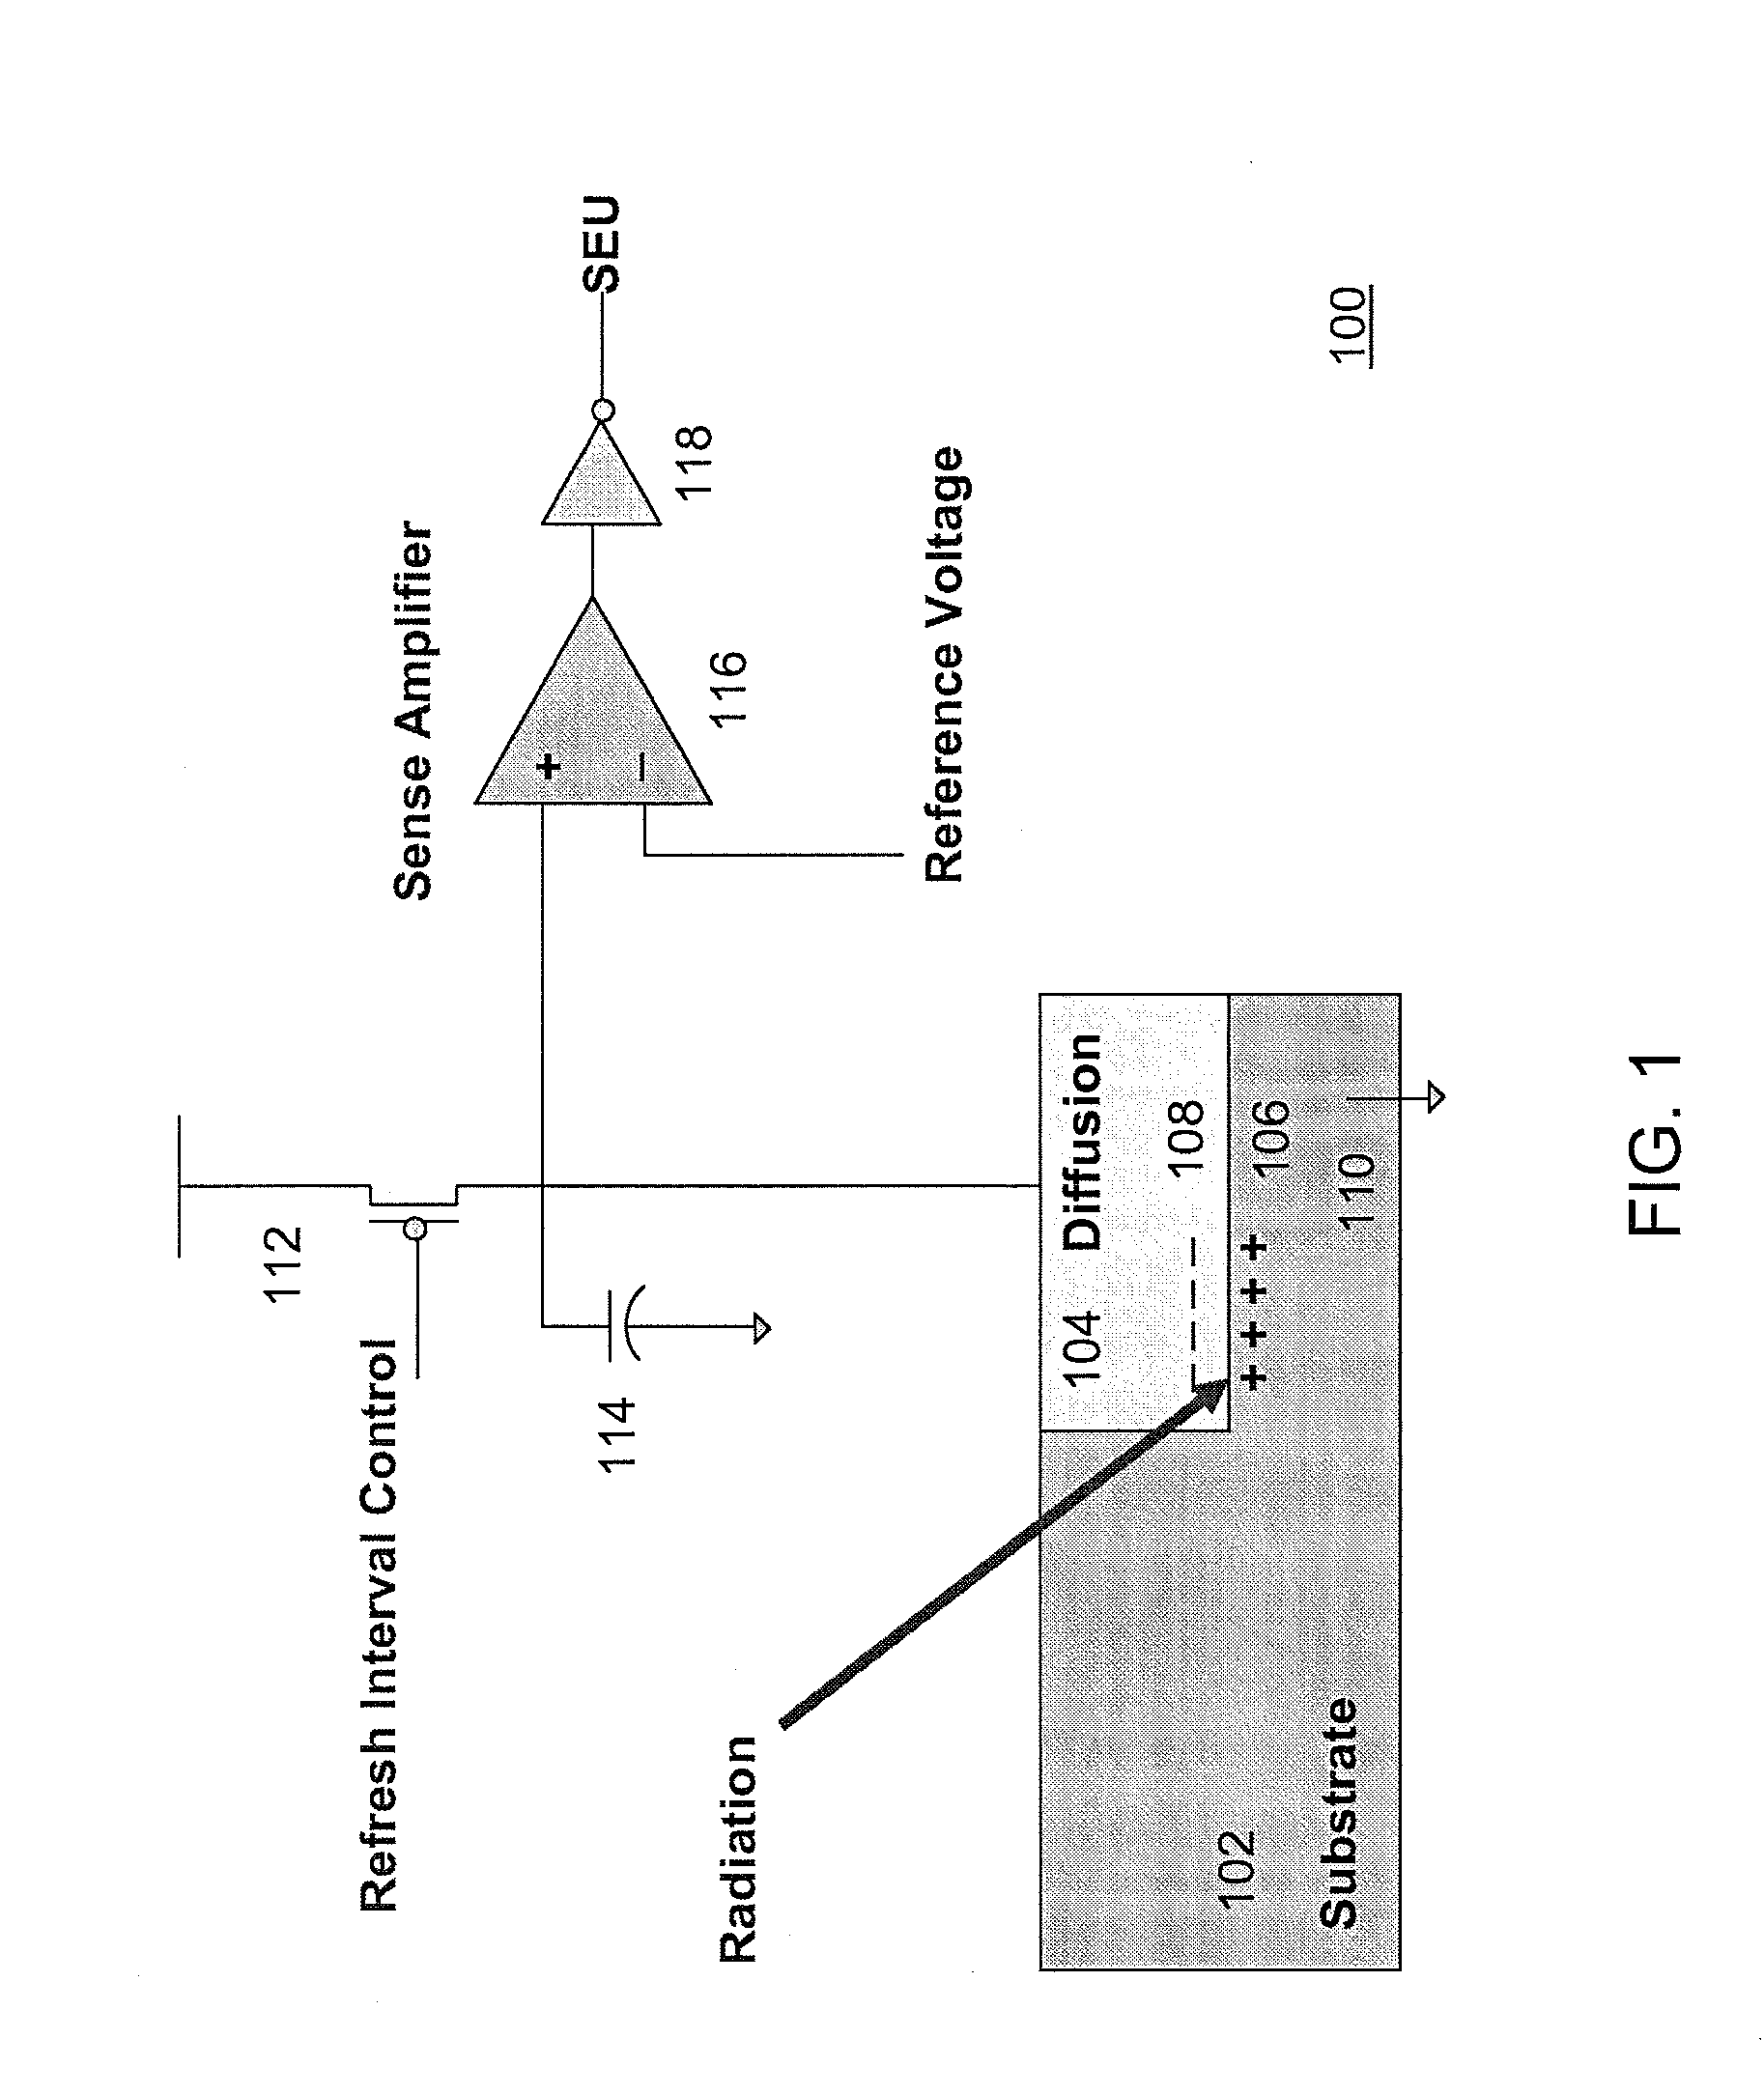 Programmable Heavy-Ion Sensing Device for Accelerated DRAM Soft Error Detection